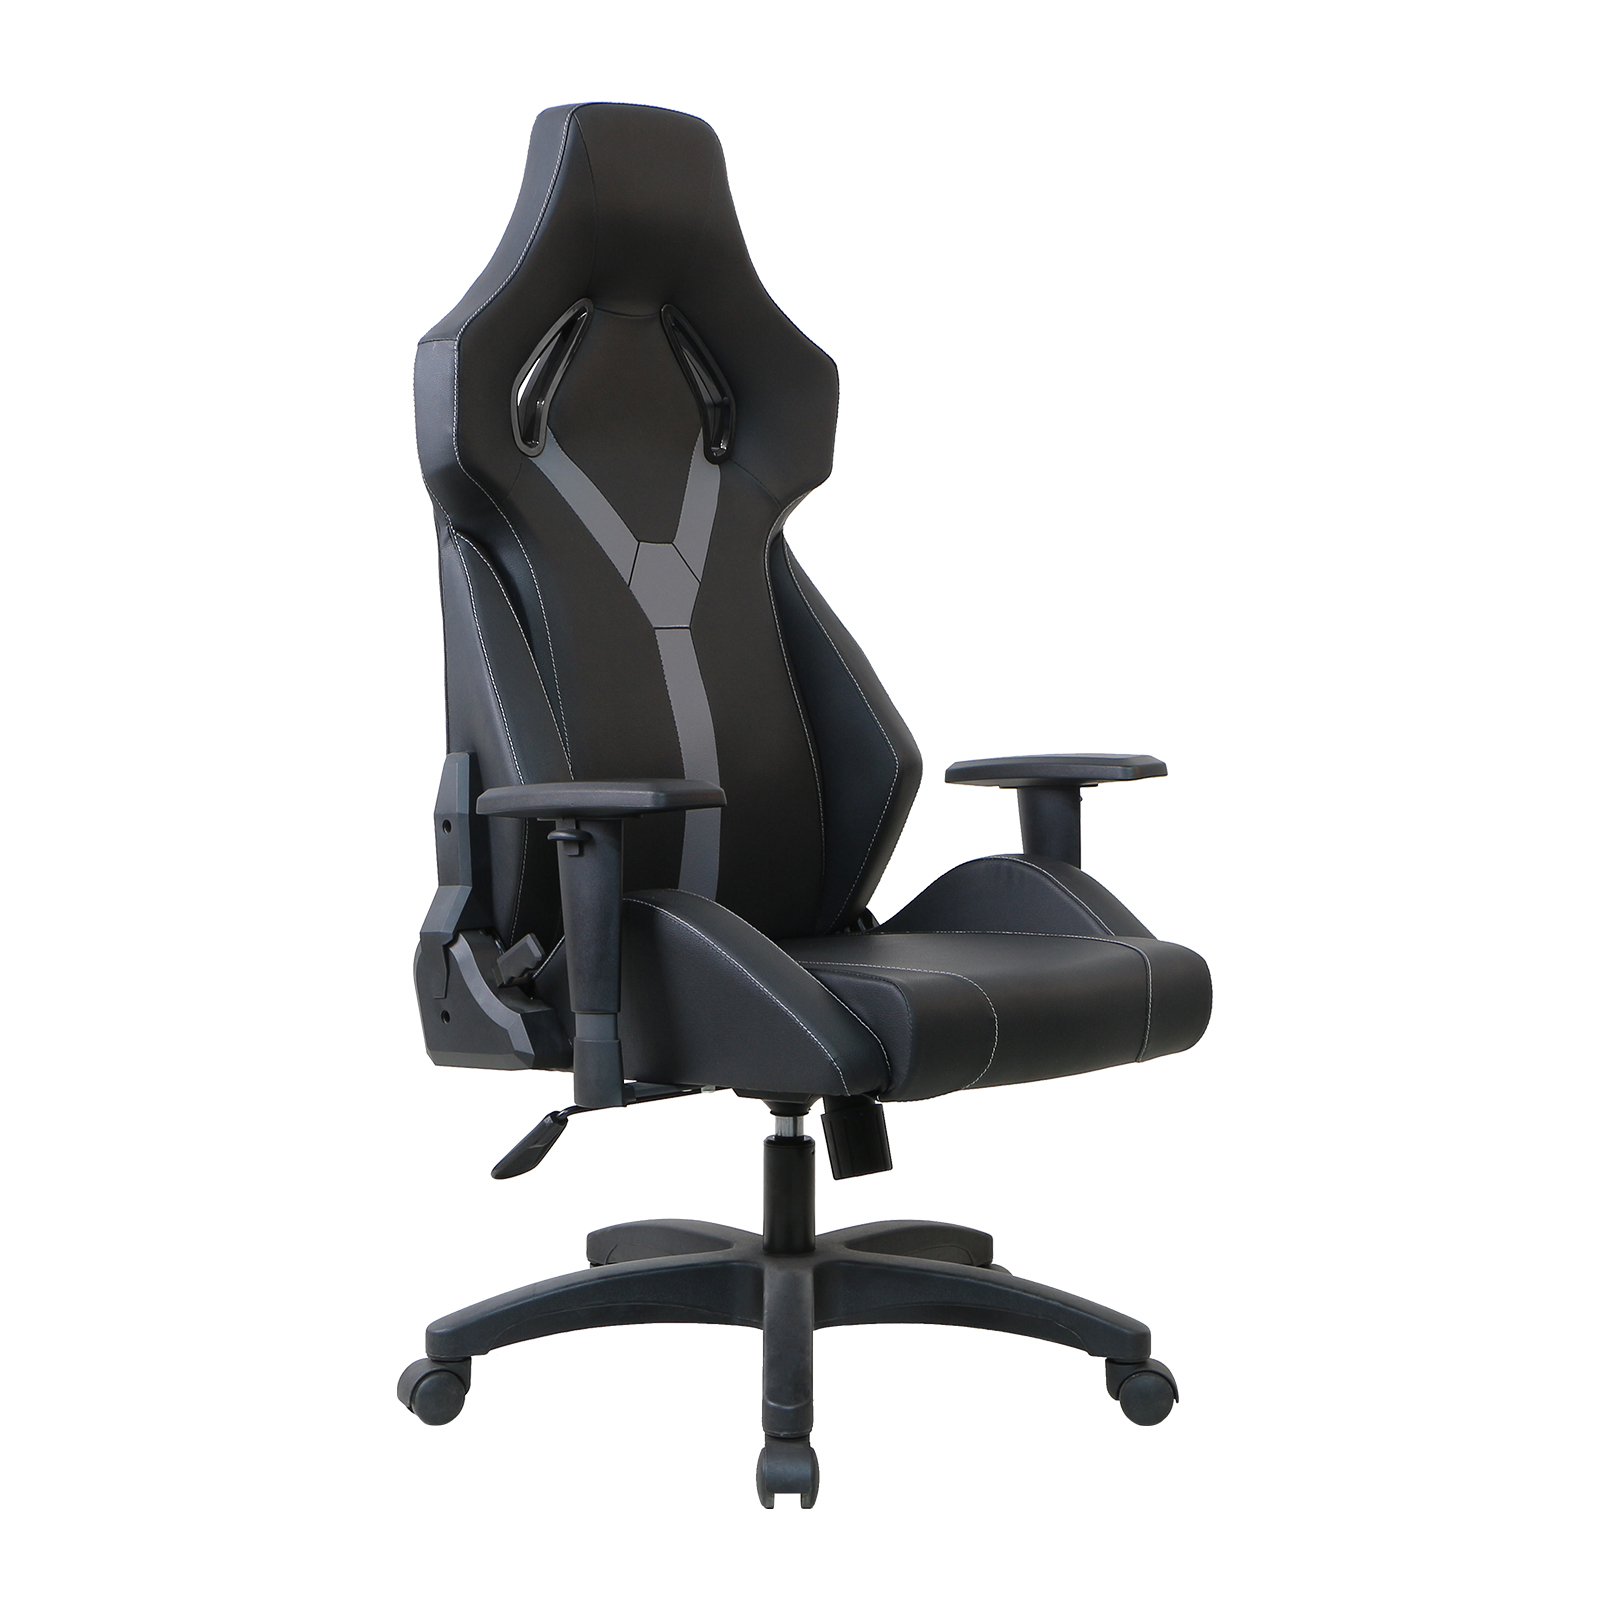 TOPSKY All Molded Foam Video Gaming Chair for Home and Office 079